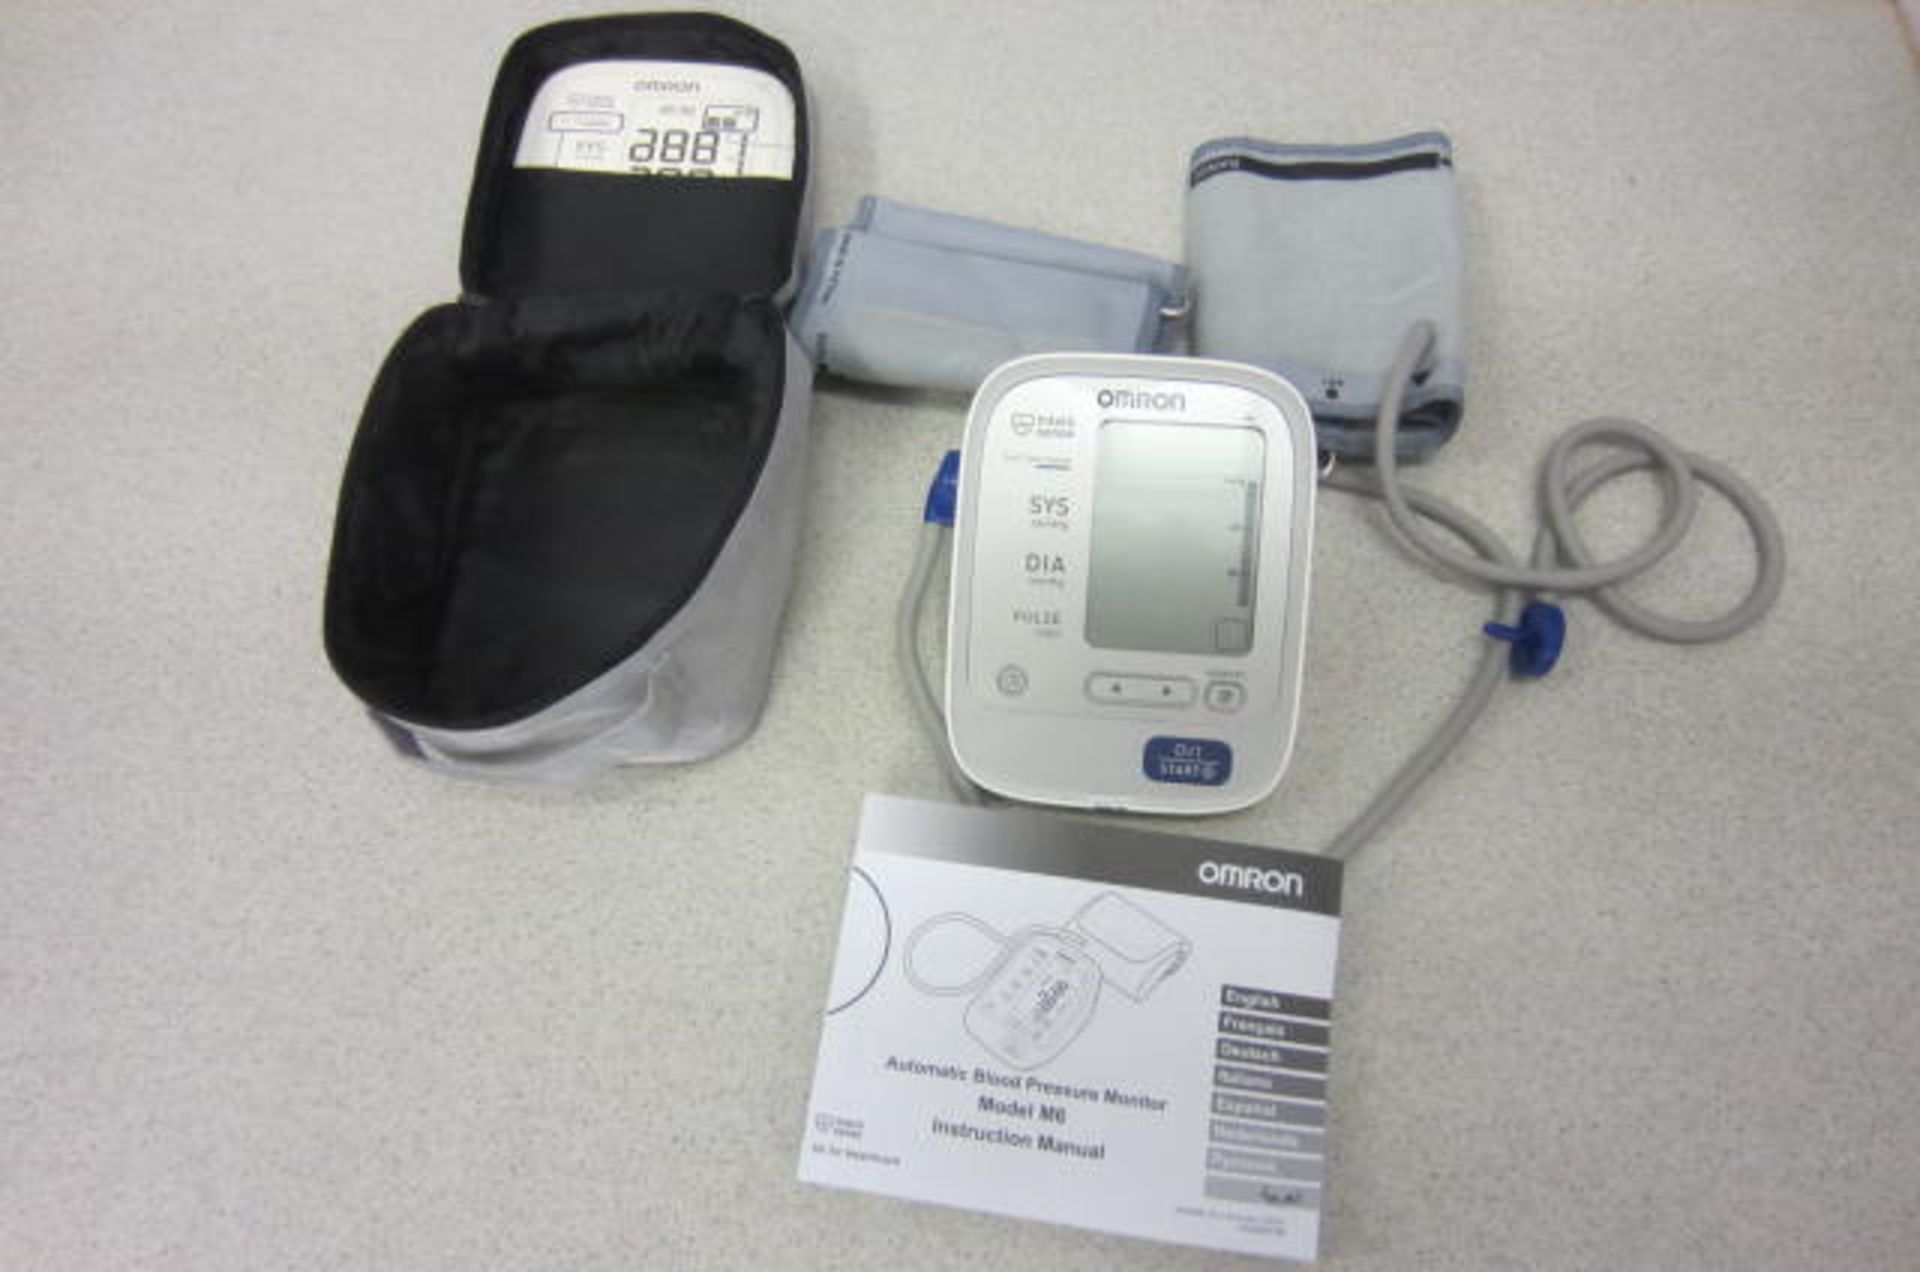 An Omron Automatic Blood Pressure Monitor, Model M6. Appears As New/Unused.